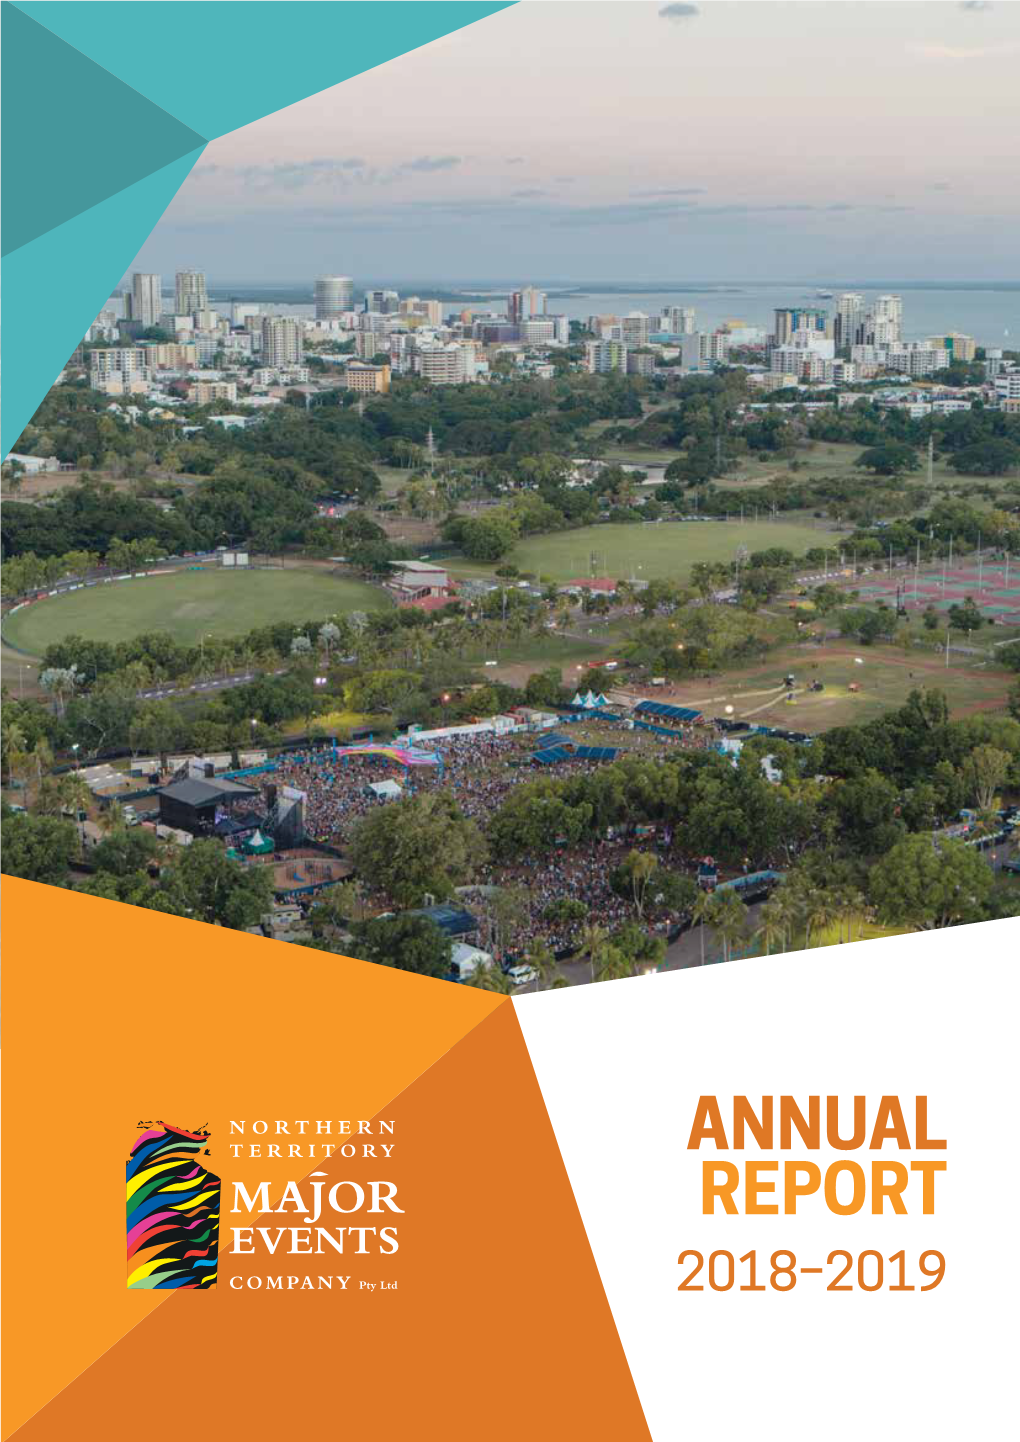 ANNUAL REPORT 2018–2019 Ii NORTHERN TERRITORY MAJOR EVENTS COMPANY